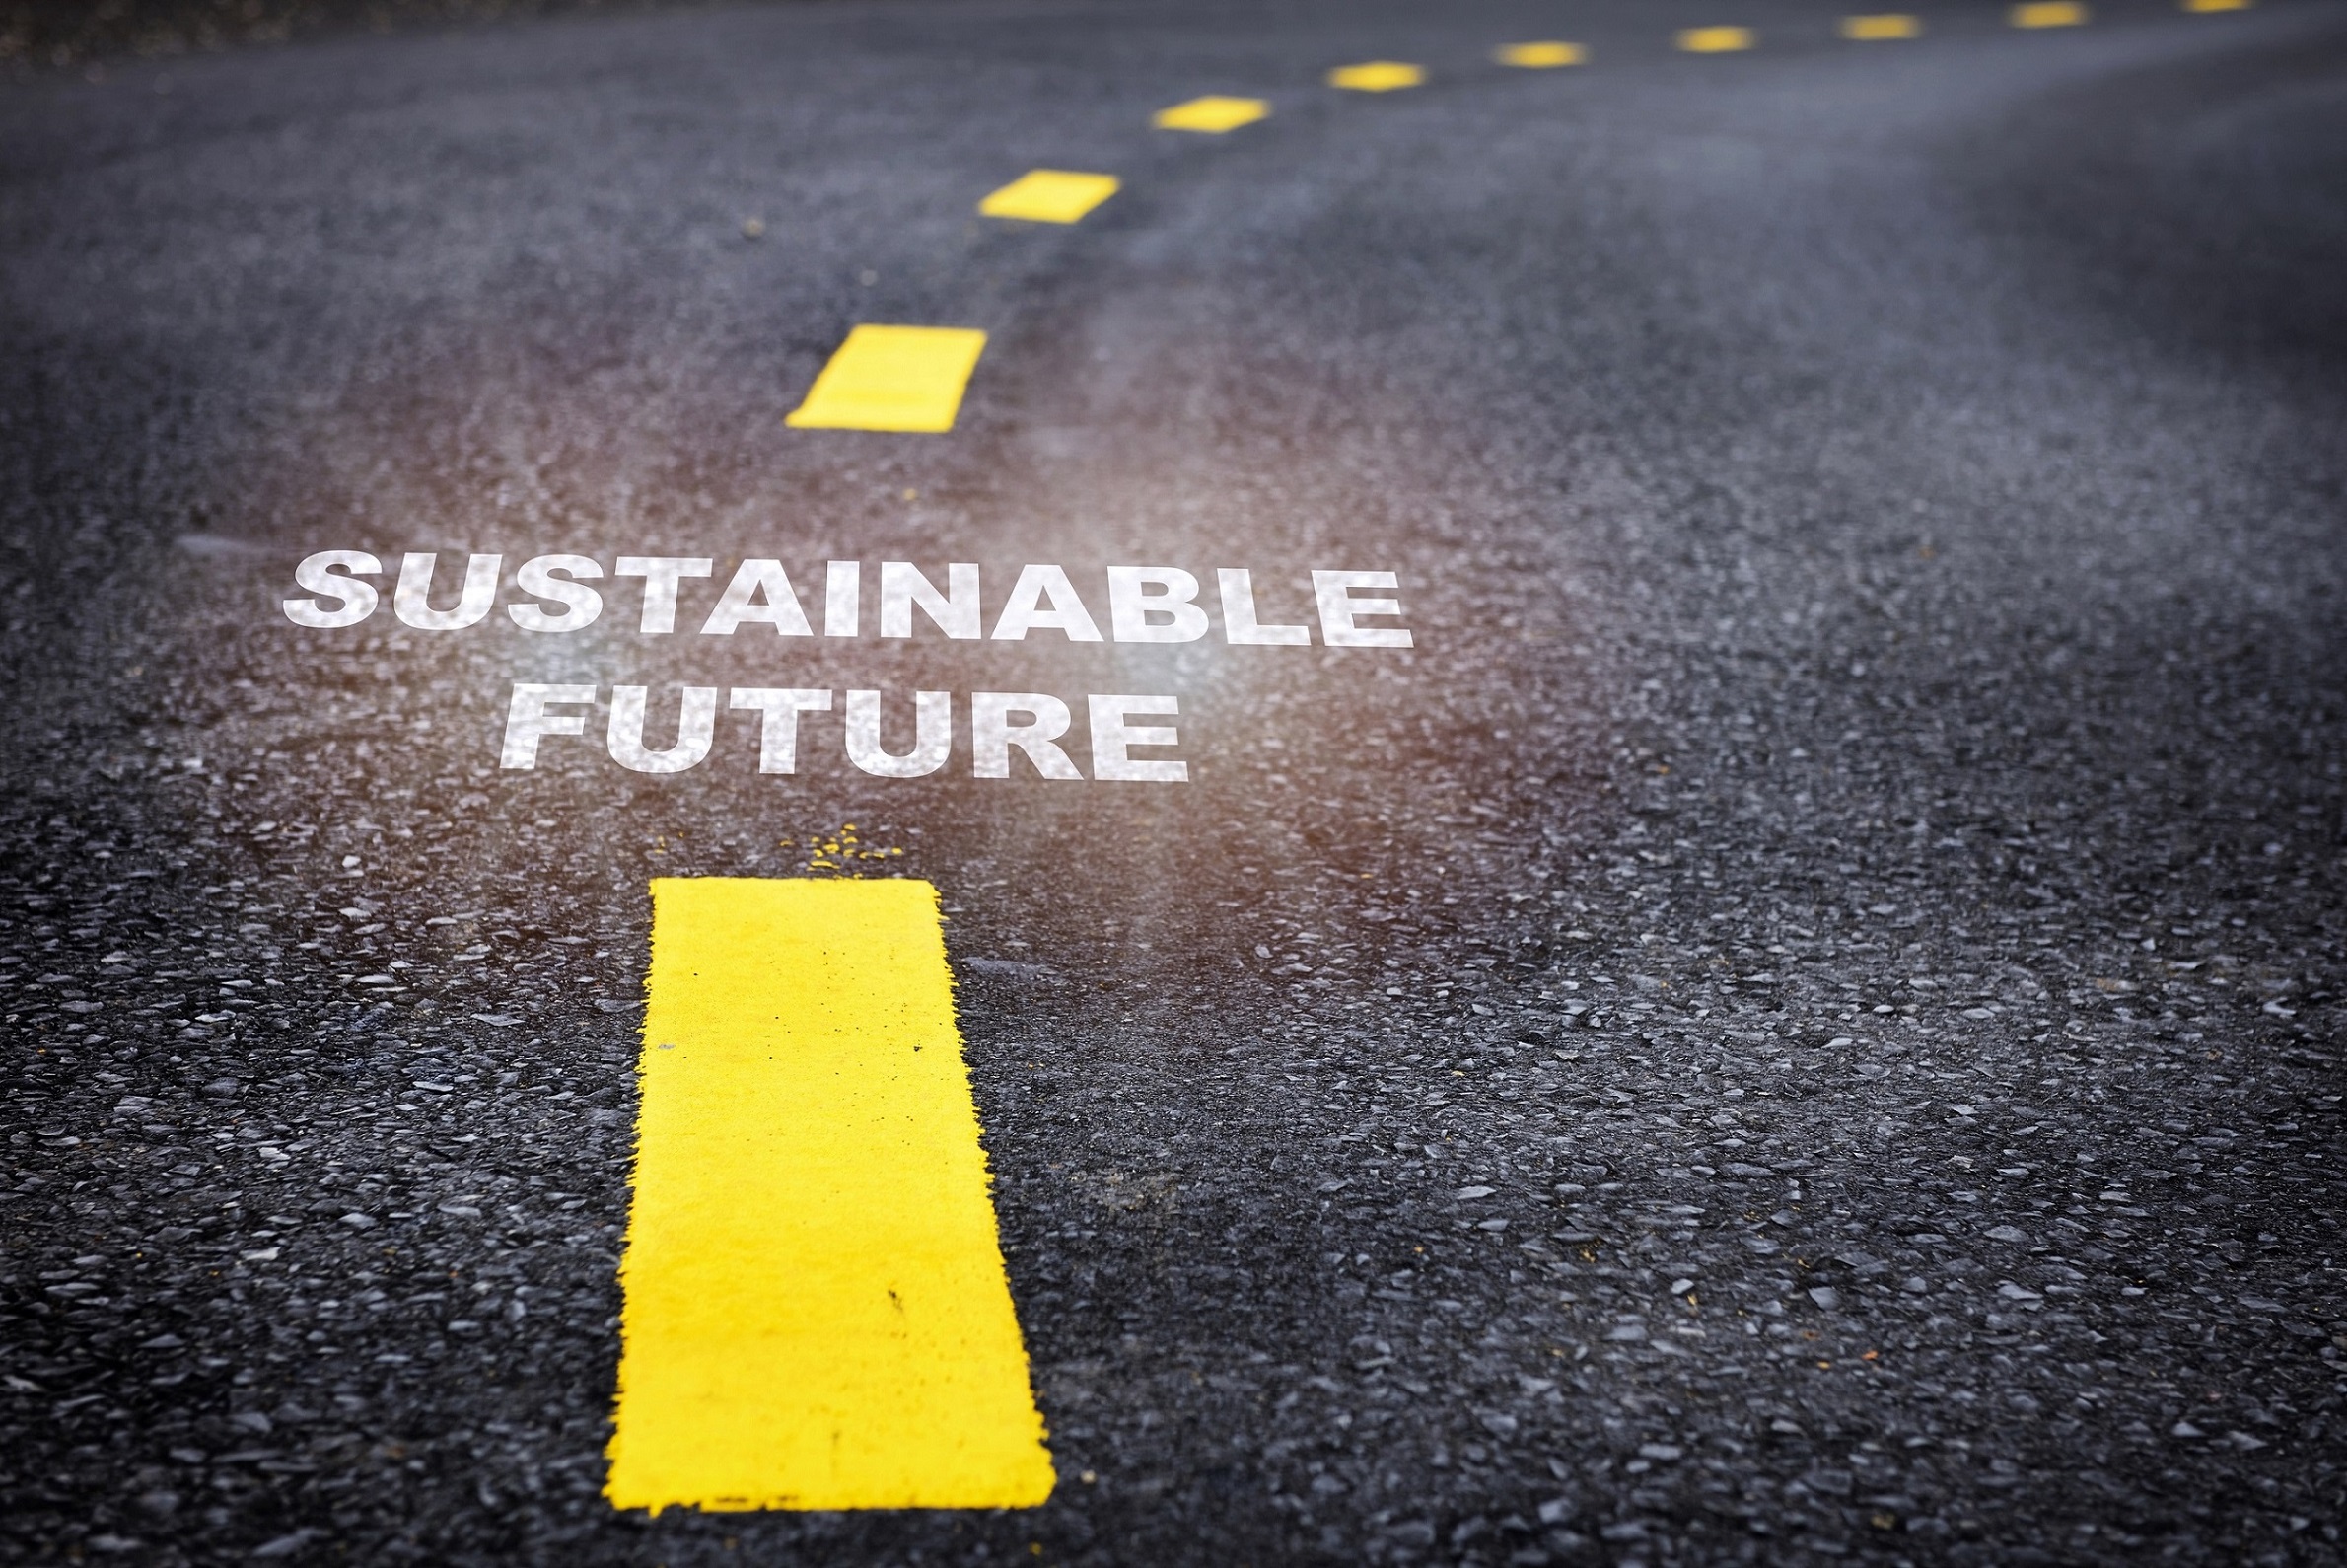 Every Sme can take Simple Steps Towards Sustainability